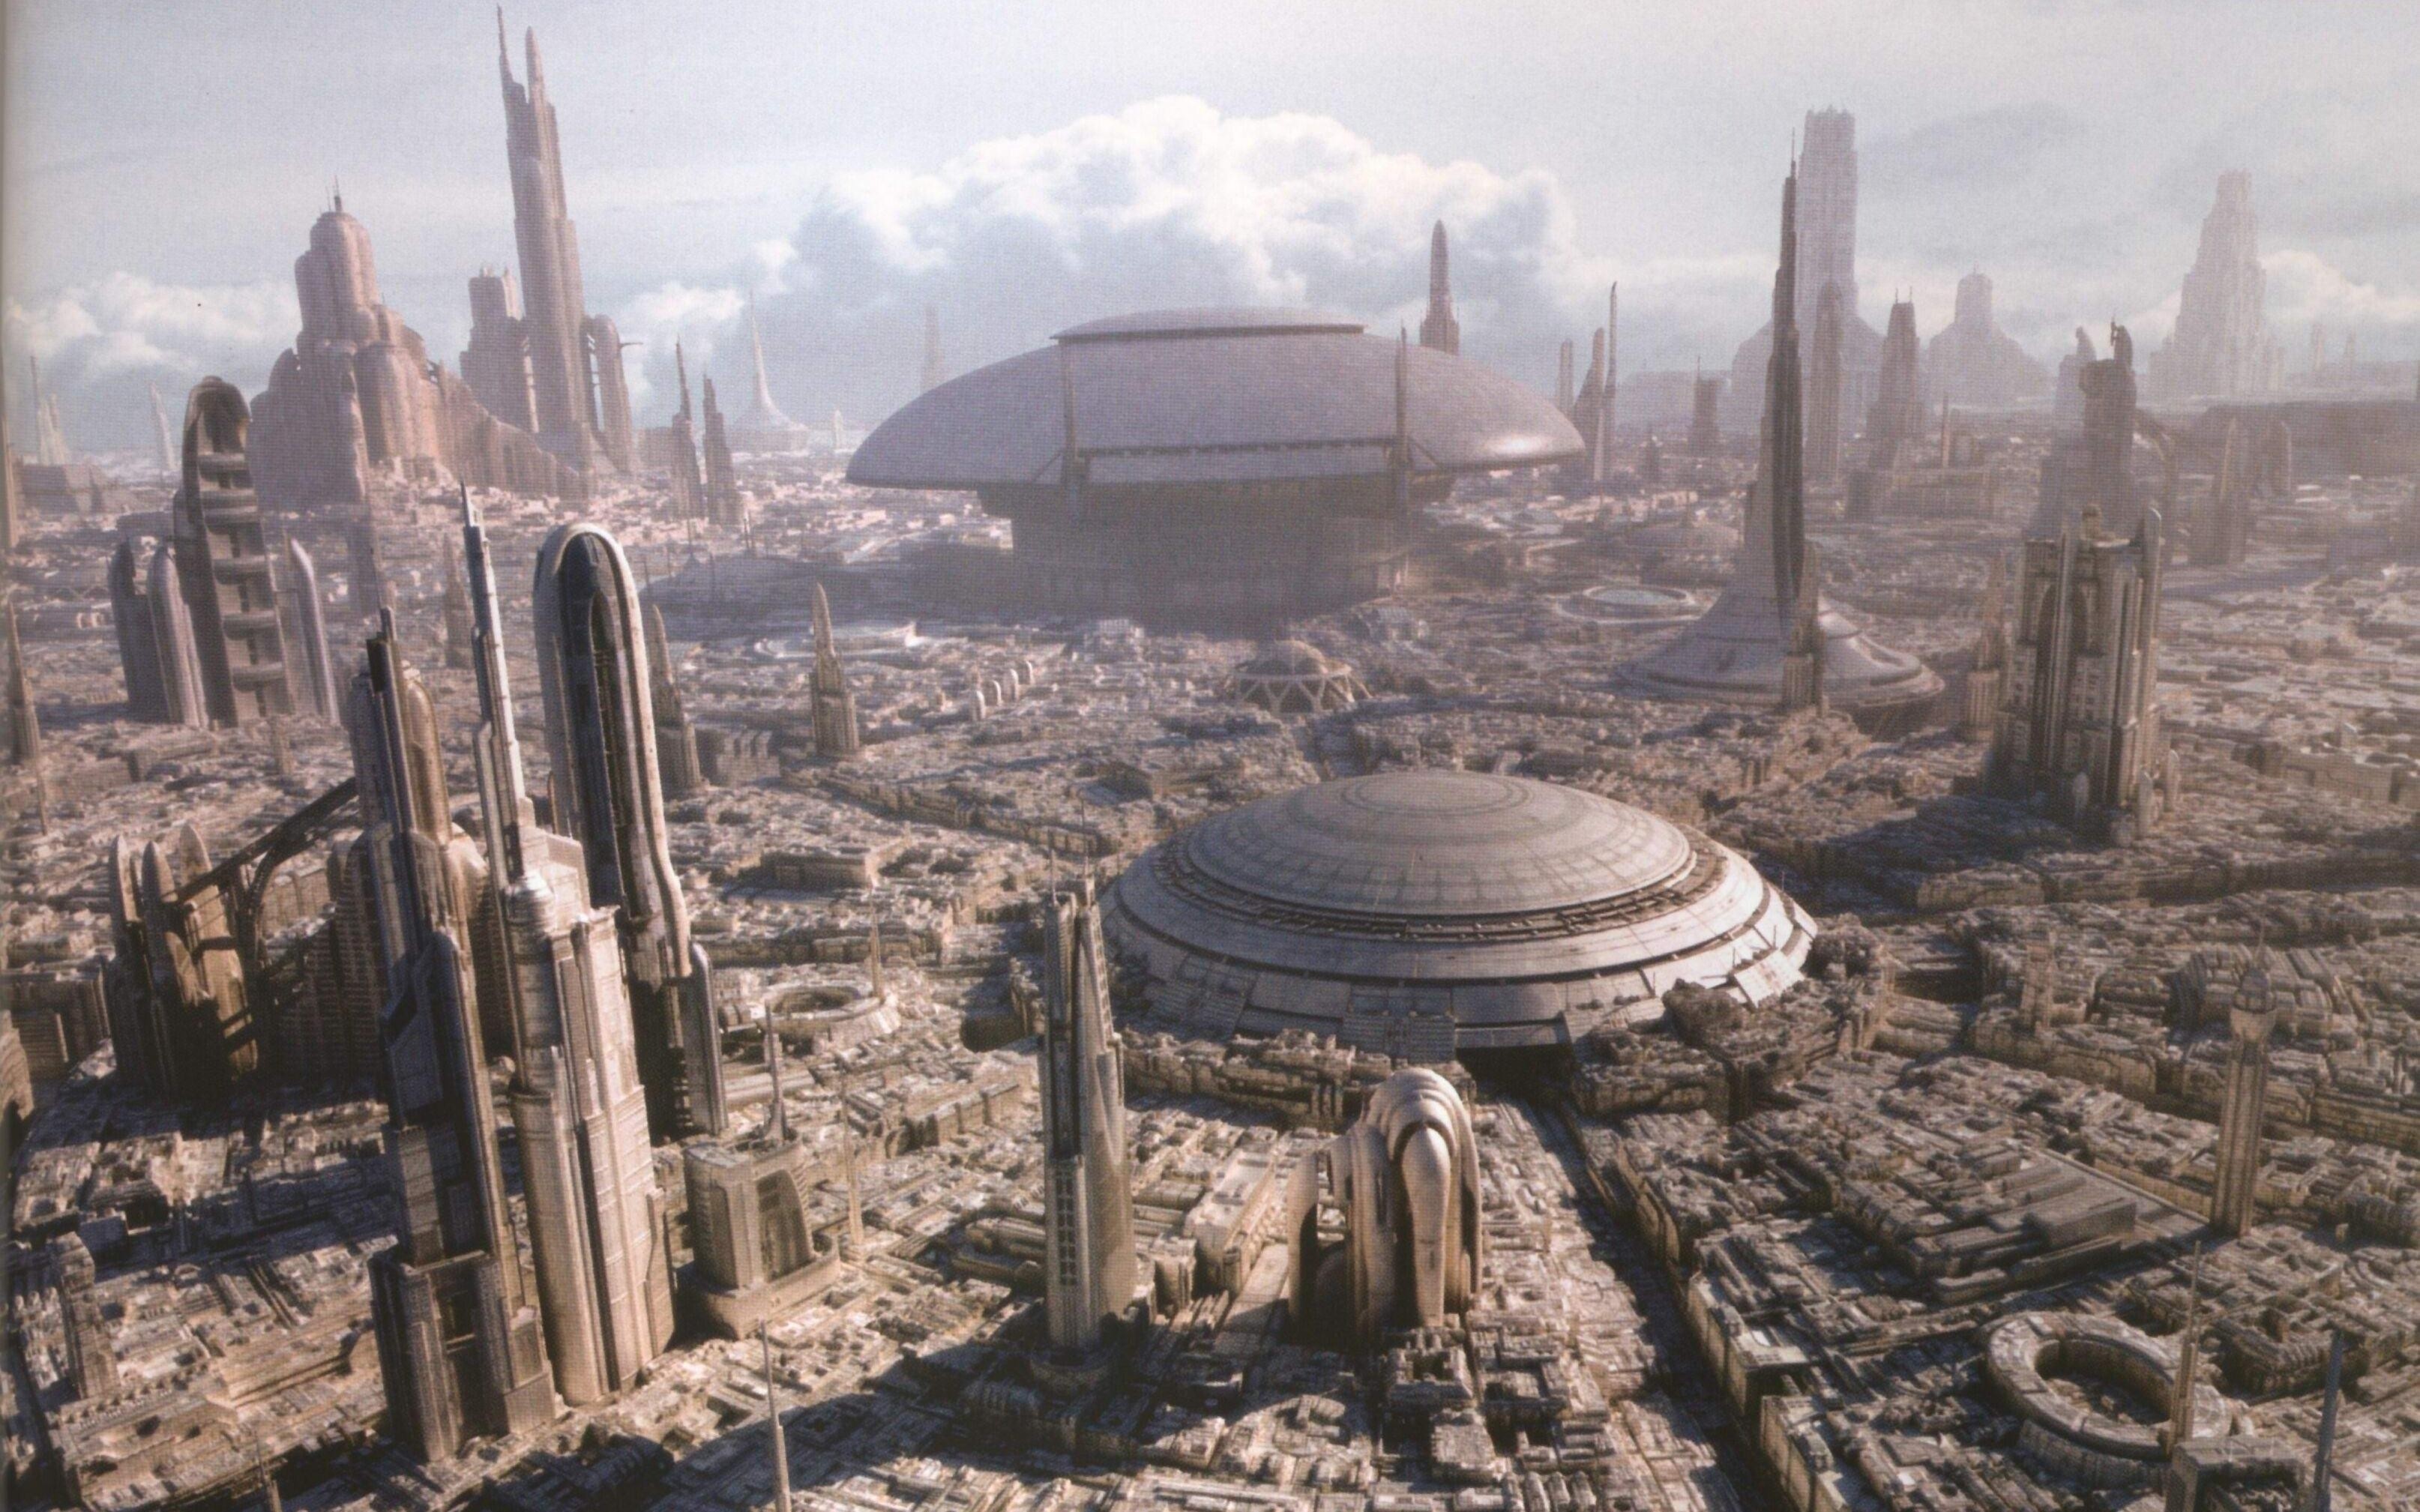 Star wars science fiction coruscant wallpaper